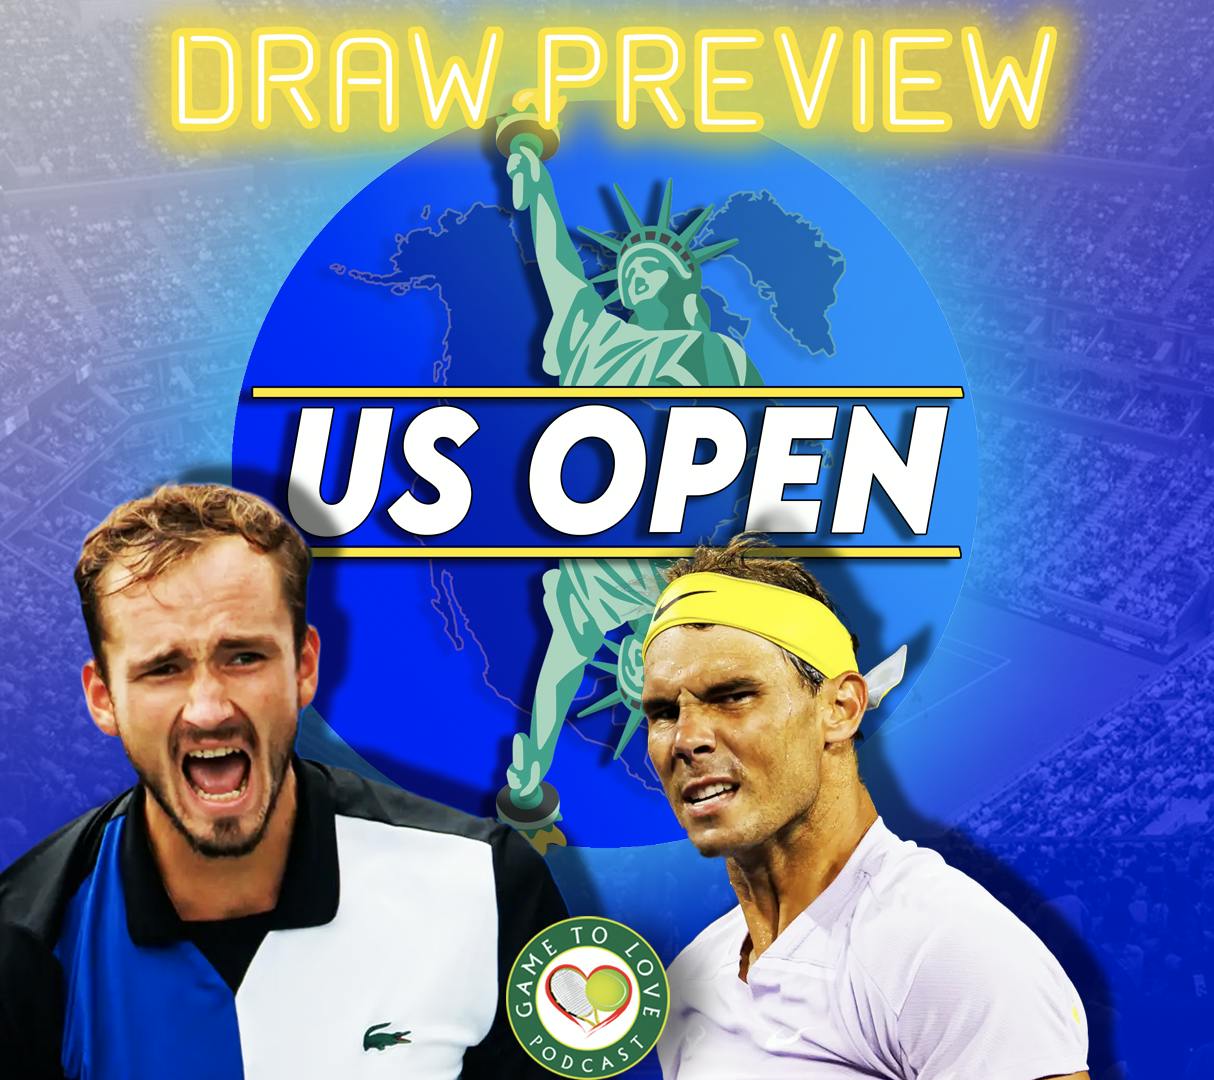 US Open 2022 | Men's Draw Preview & Predictions | GTL Tennis Podcast #383